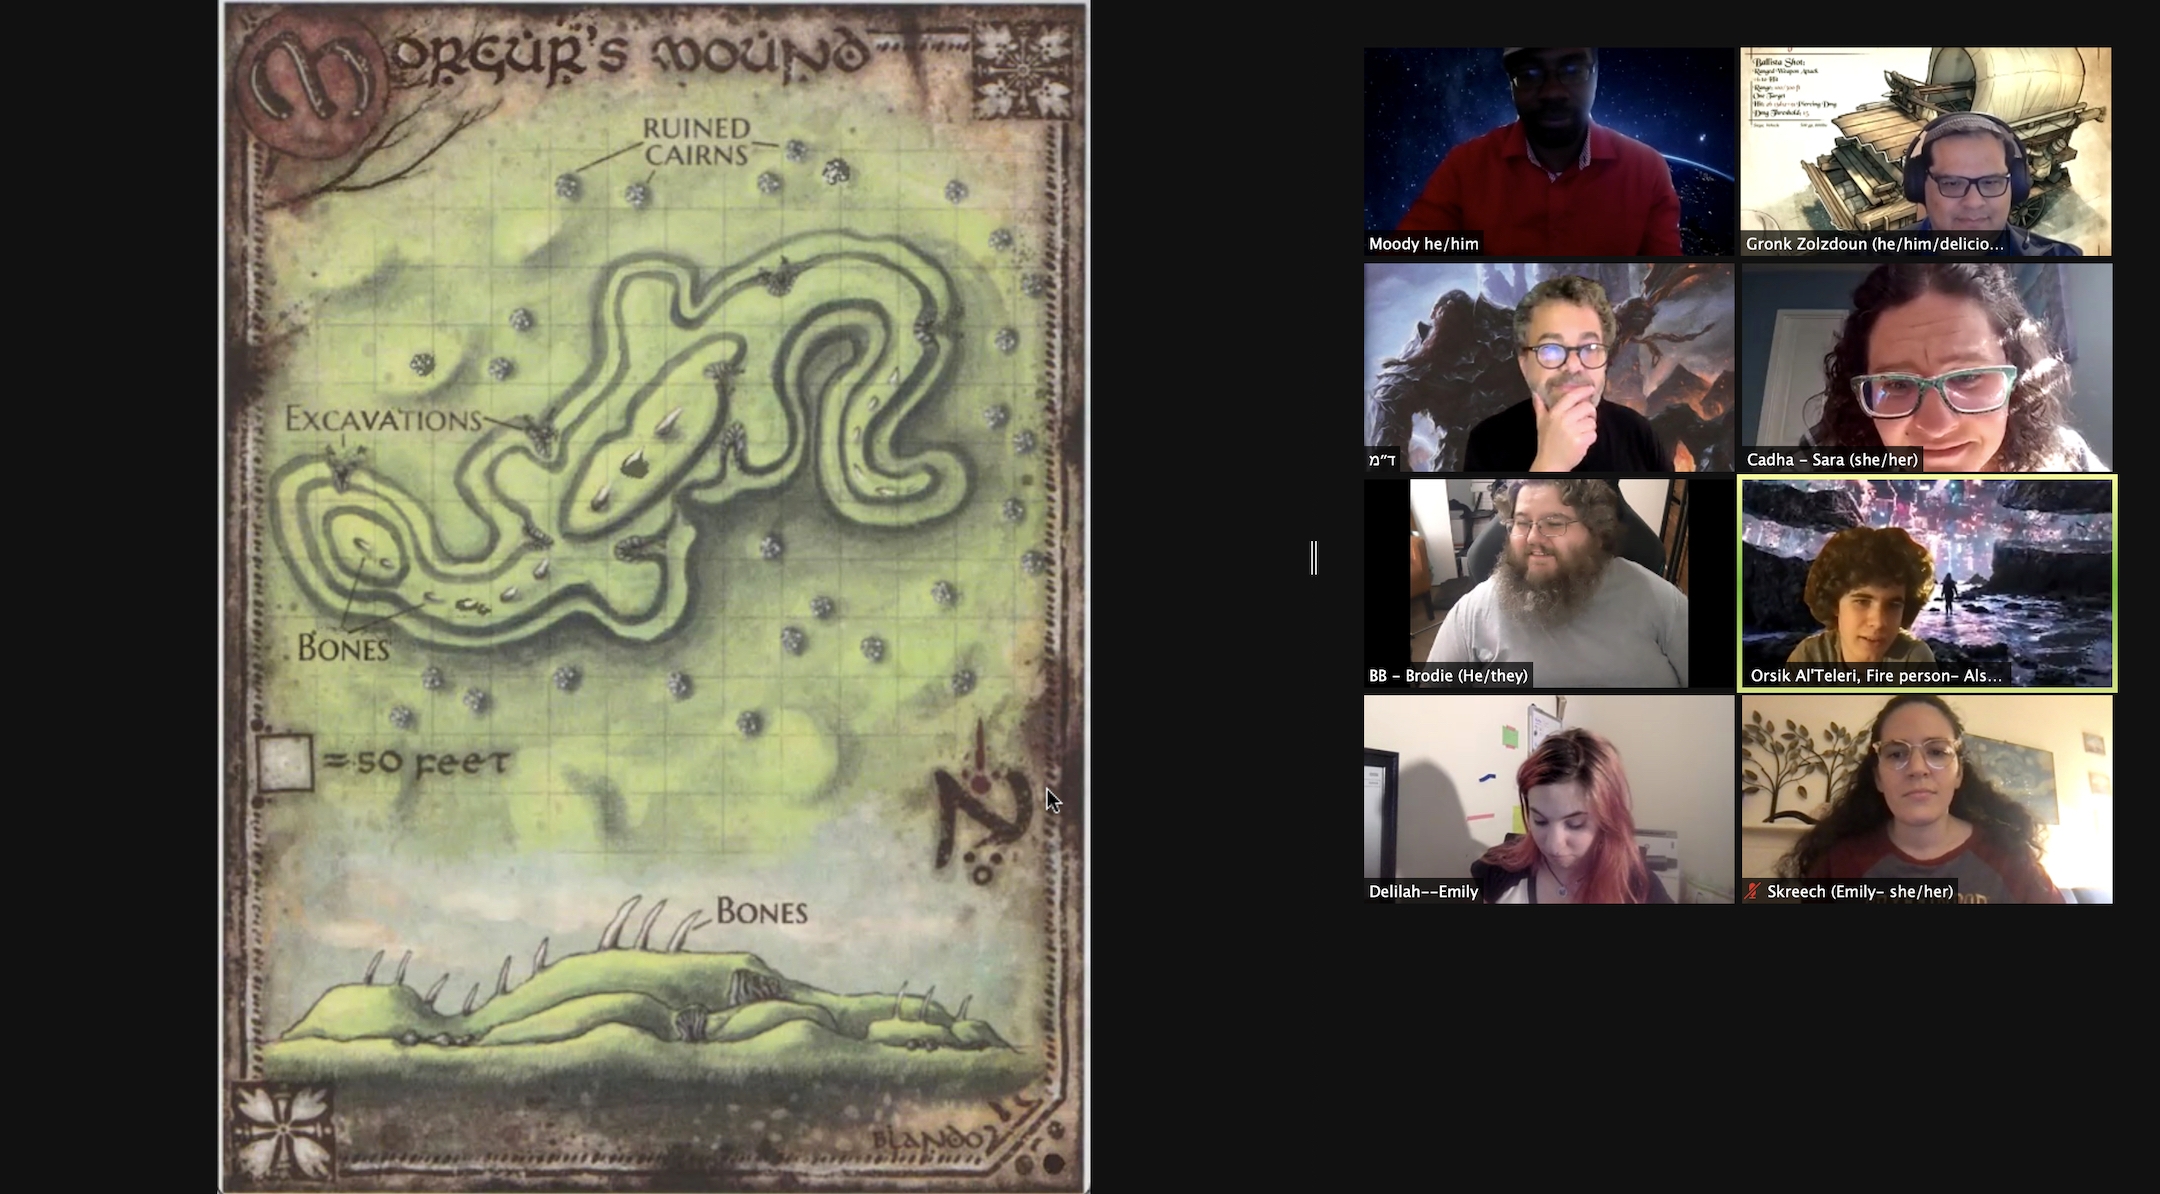 A group of rabbis on Zoom inspect a "Dungeons & Dragons" game map